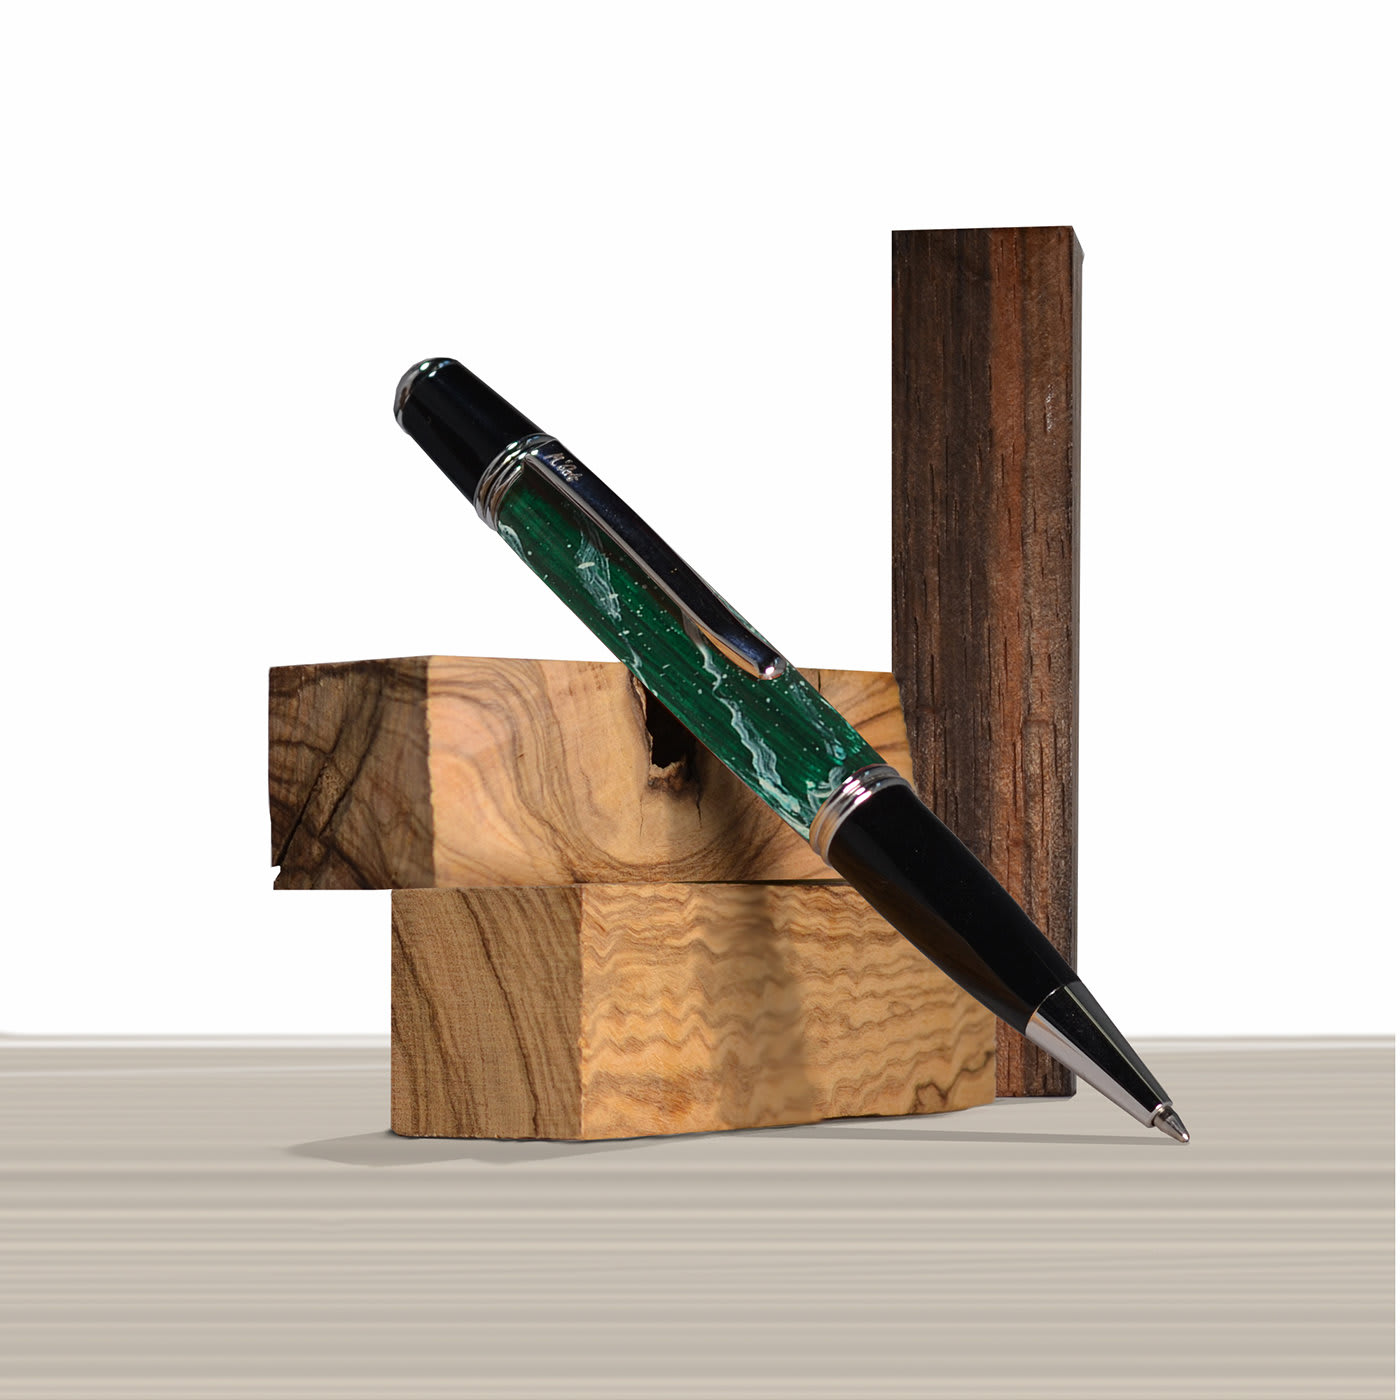 Mantinea Marbled Green Ballpoint Pen in Olive Wood - M'Art